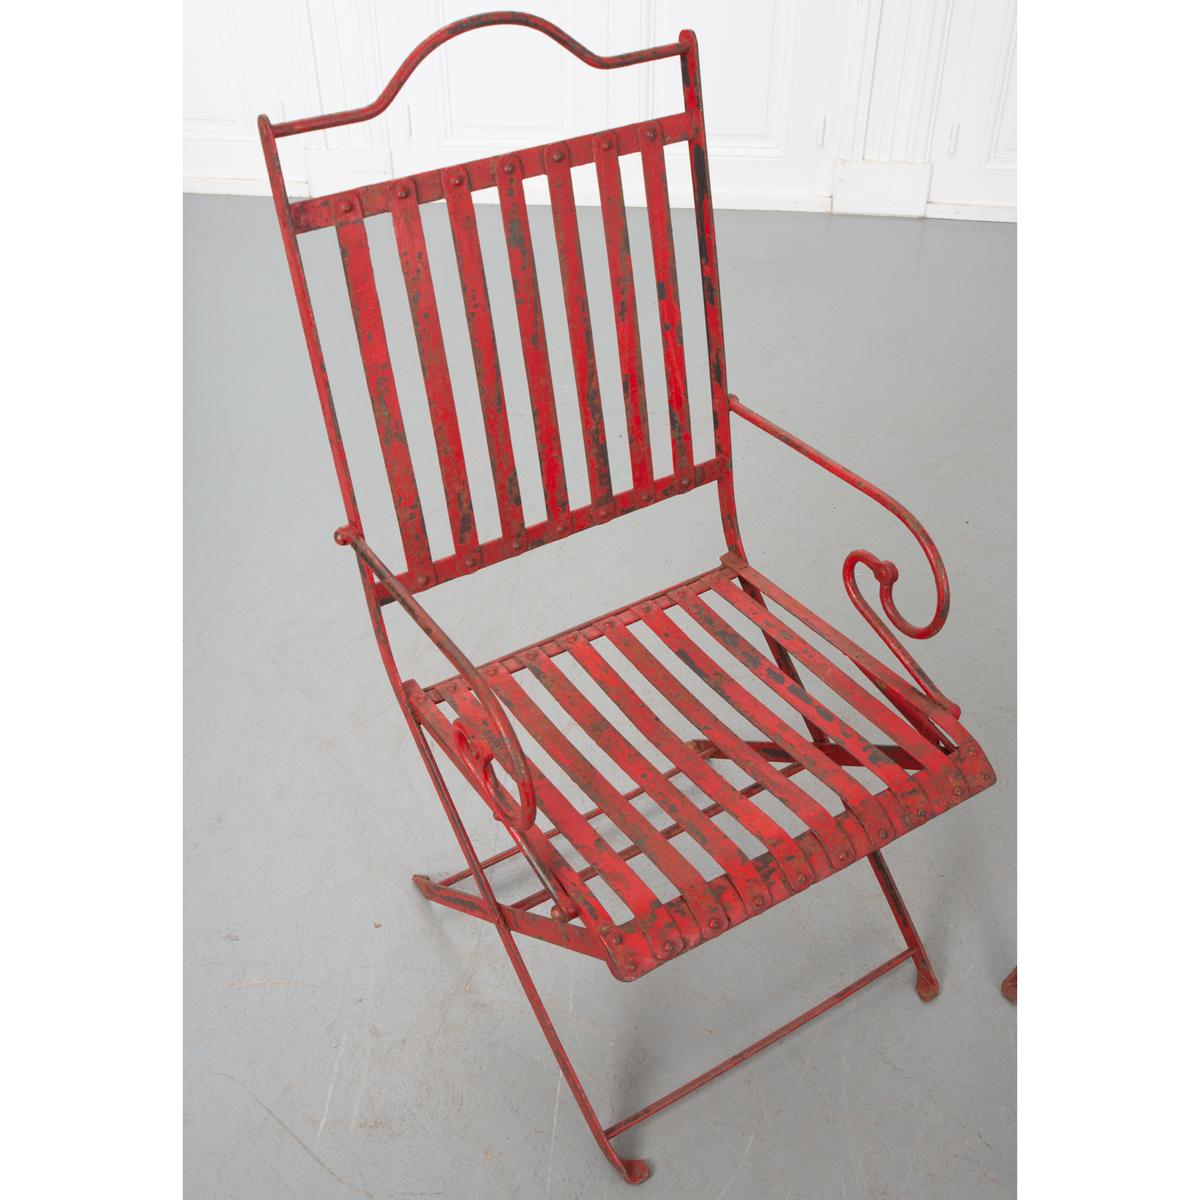 This pair of French painted red antique iron garden chairs has a playful design. They have an arched back of vertical slats and seat with artfully scrolled arms. The legs cross and are connected by stretchers. They would make a whimsical addition to